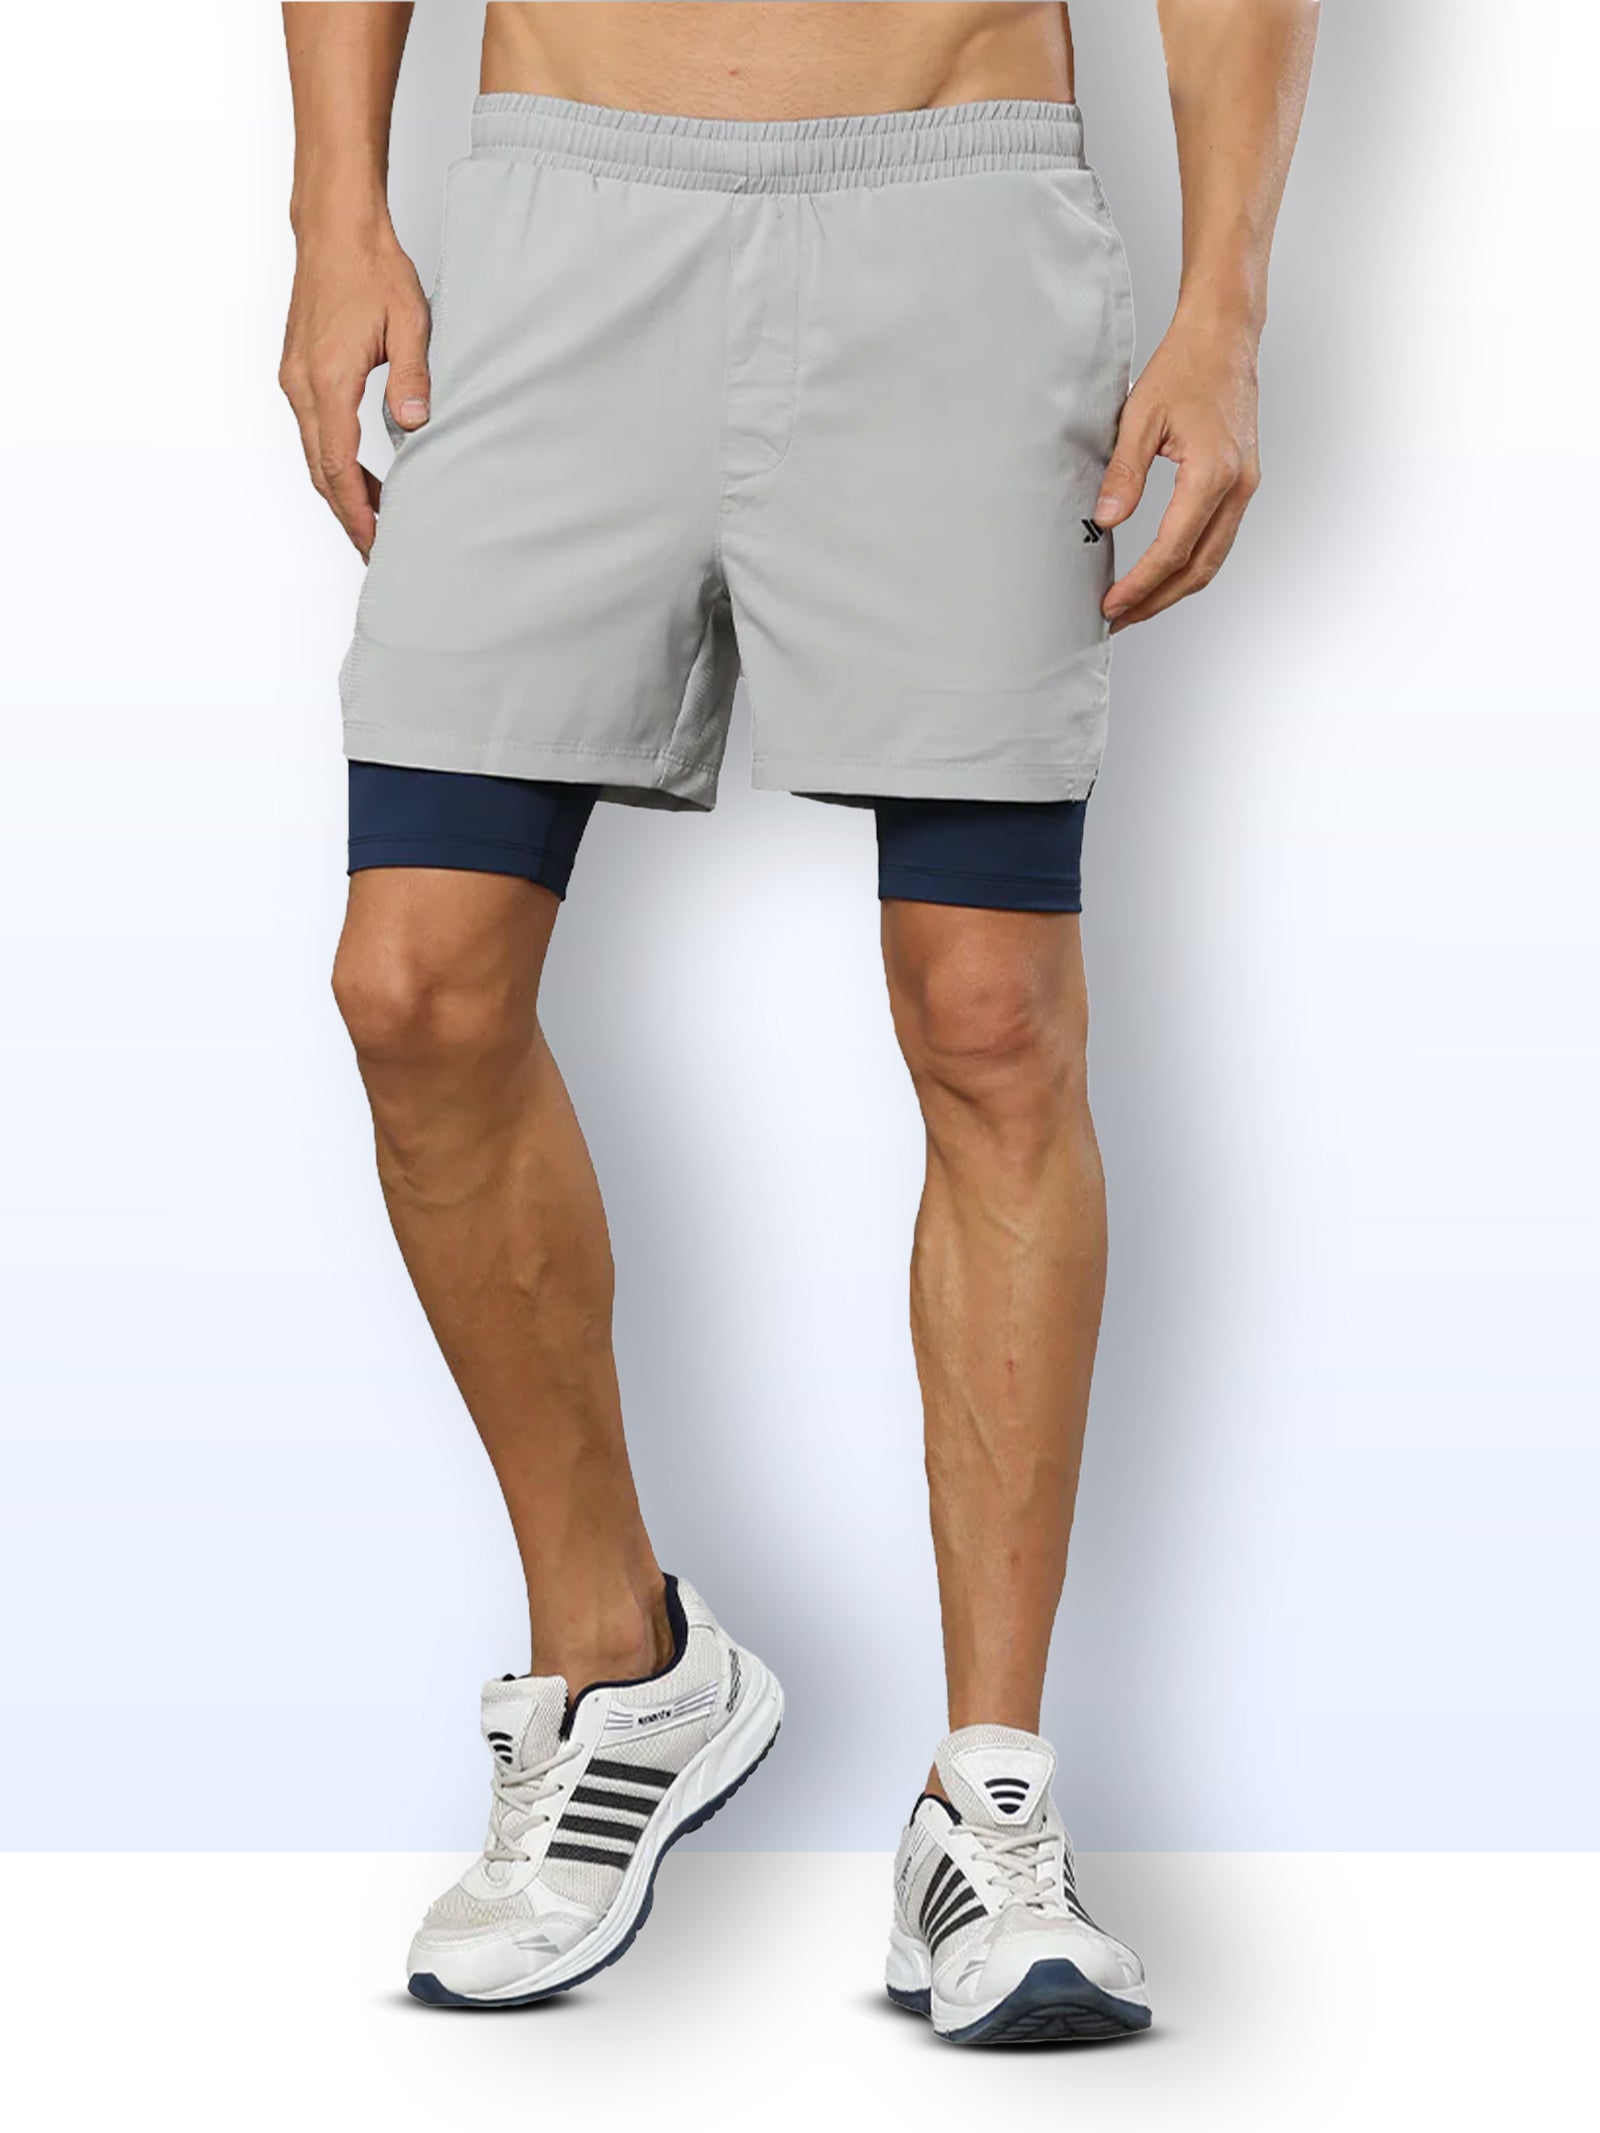 Men's Performance Shorts with Inner Tights